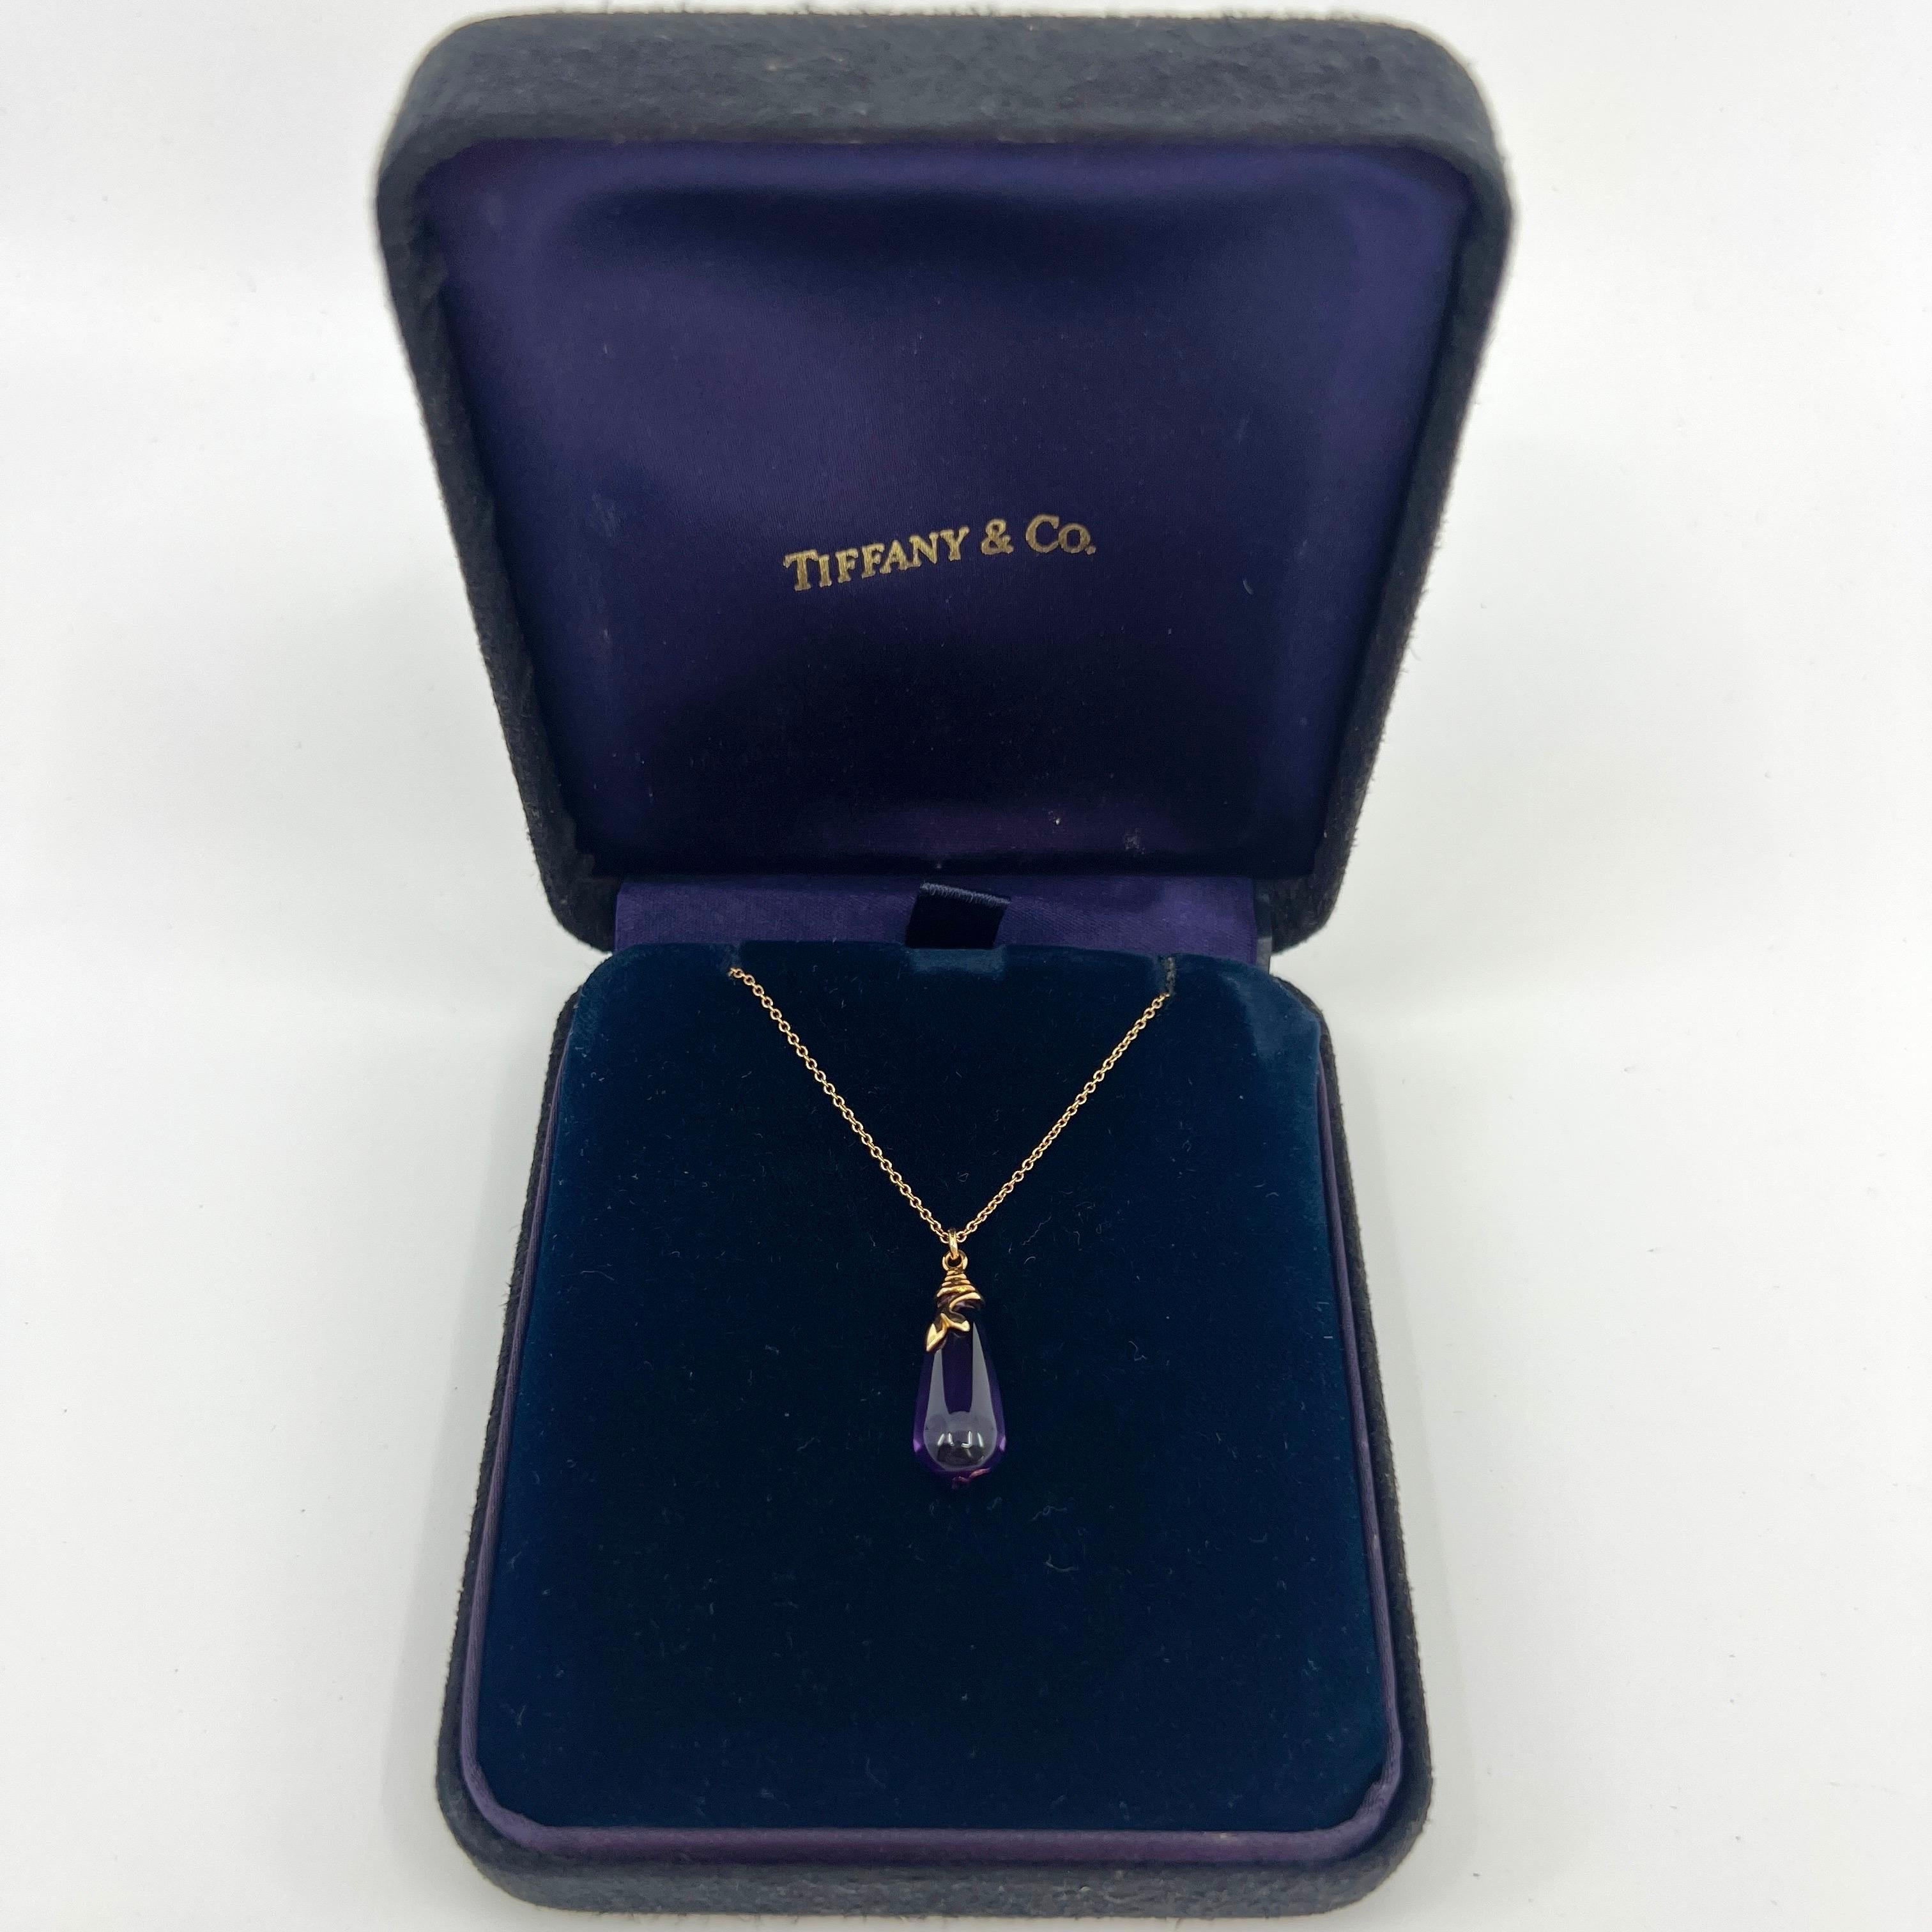 Rare Tiffany & Co. Paloma Picasso Olive Leaf Amethyst 18k Yellow Gold Drop Pendant Necklace.

A beautiful and rare 18k gold pendant necklace set with a stunning purple amethyst drop measuring approx. 25x8mm.

Fine jewellery houses like Tiffany only